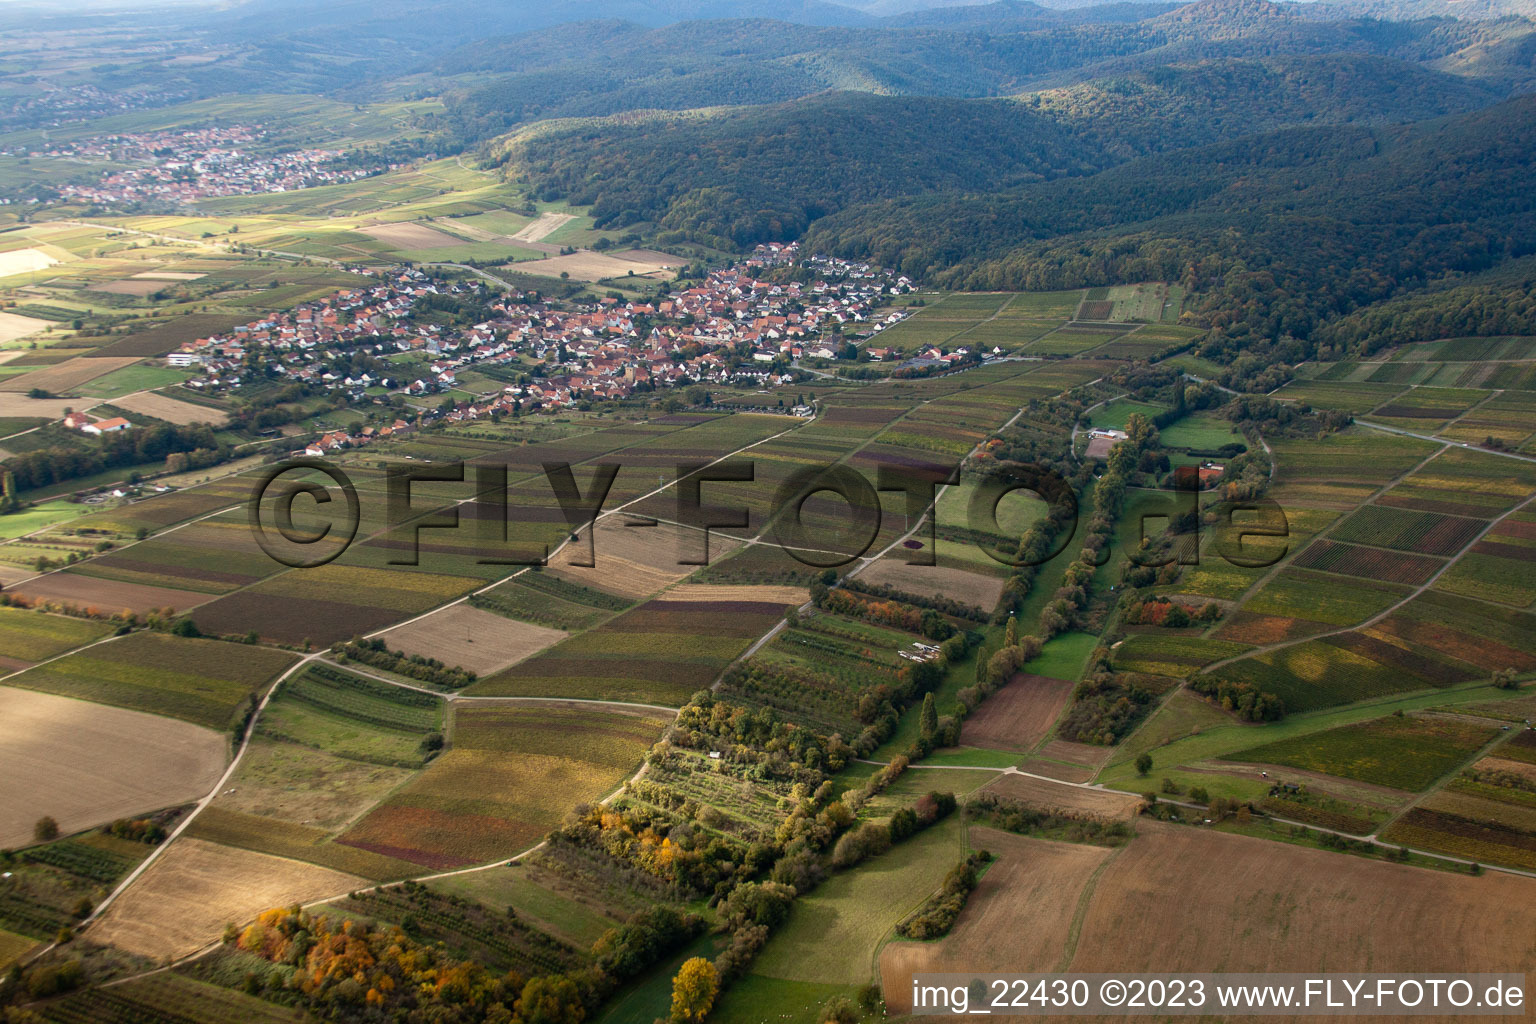 Oberotterbach in the state Rhineland-Palatinate, Germany from the drone perspective